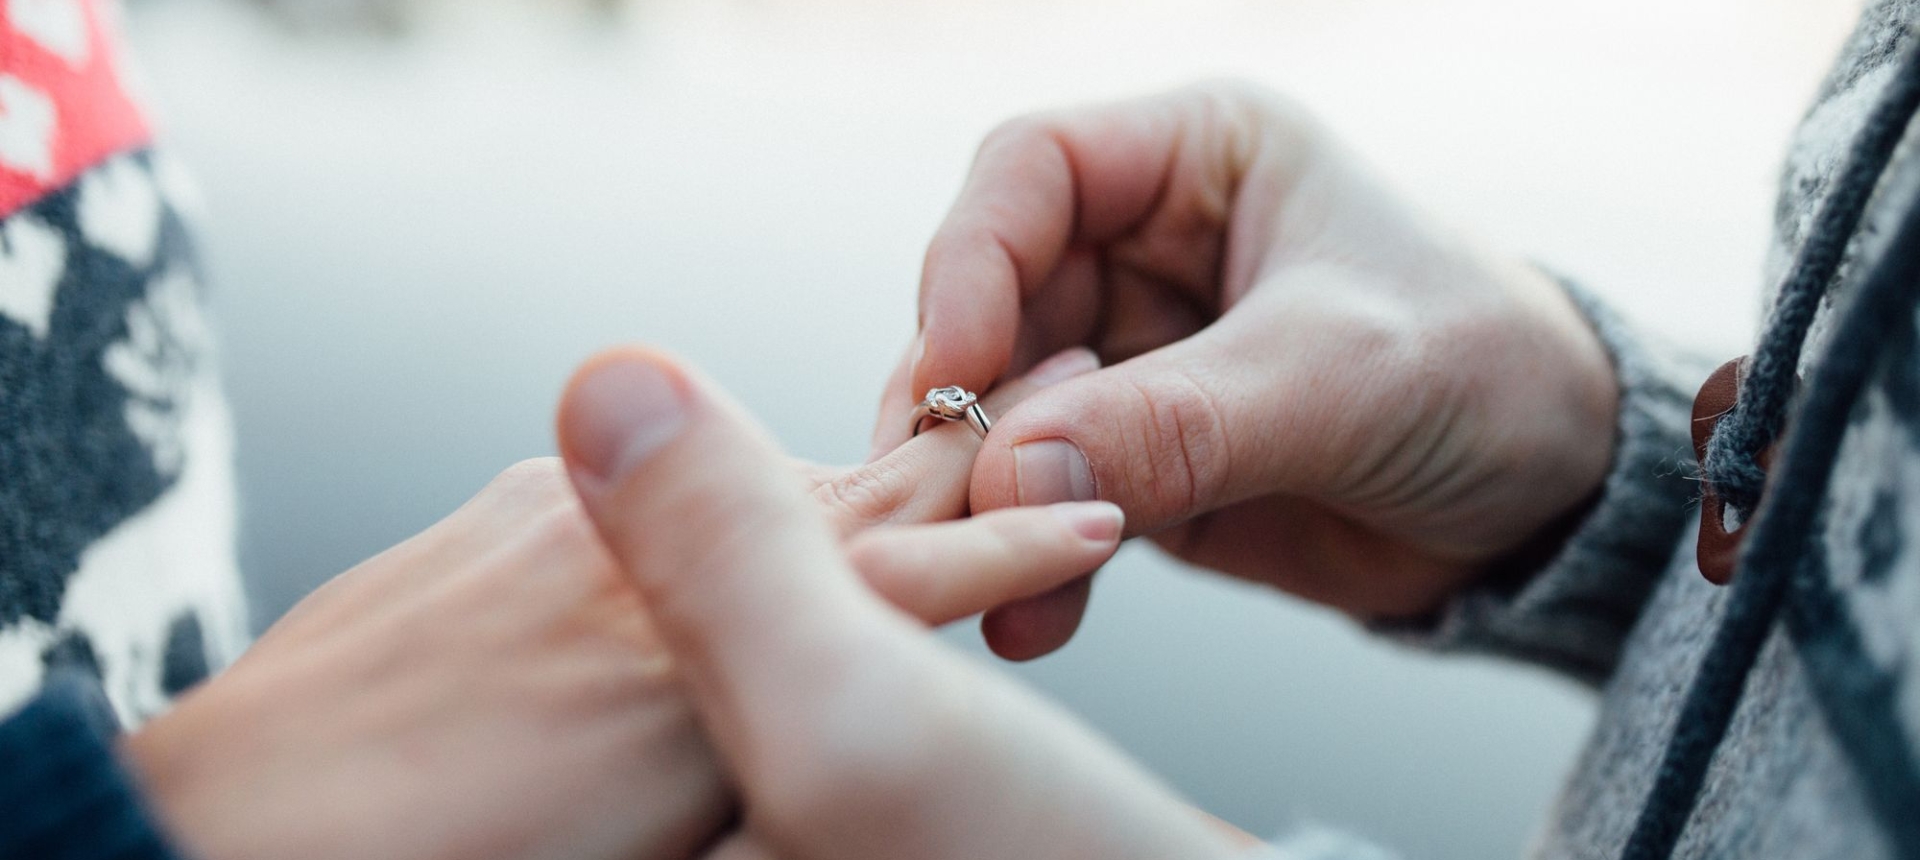 A man putting an engagement ring on a woman's hand